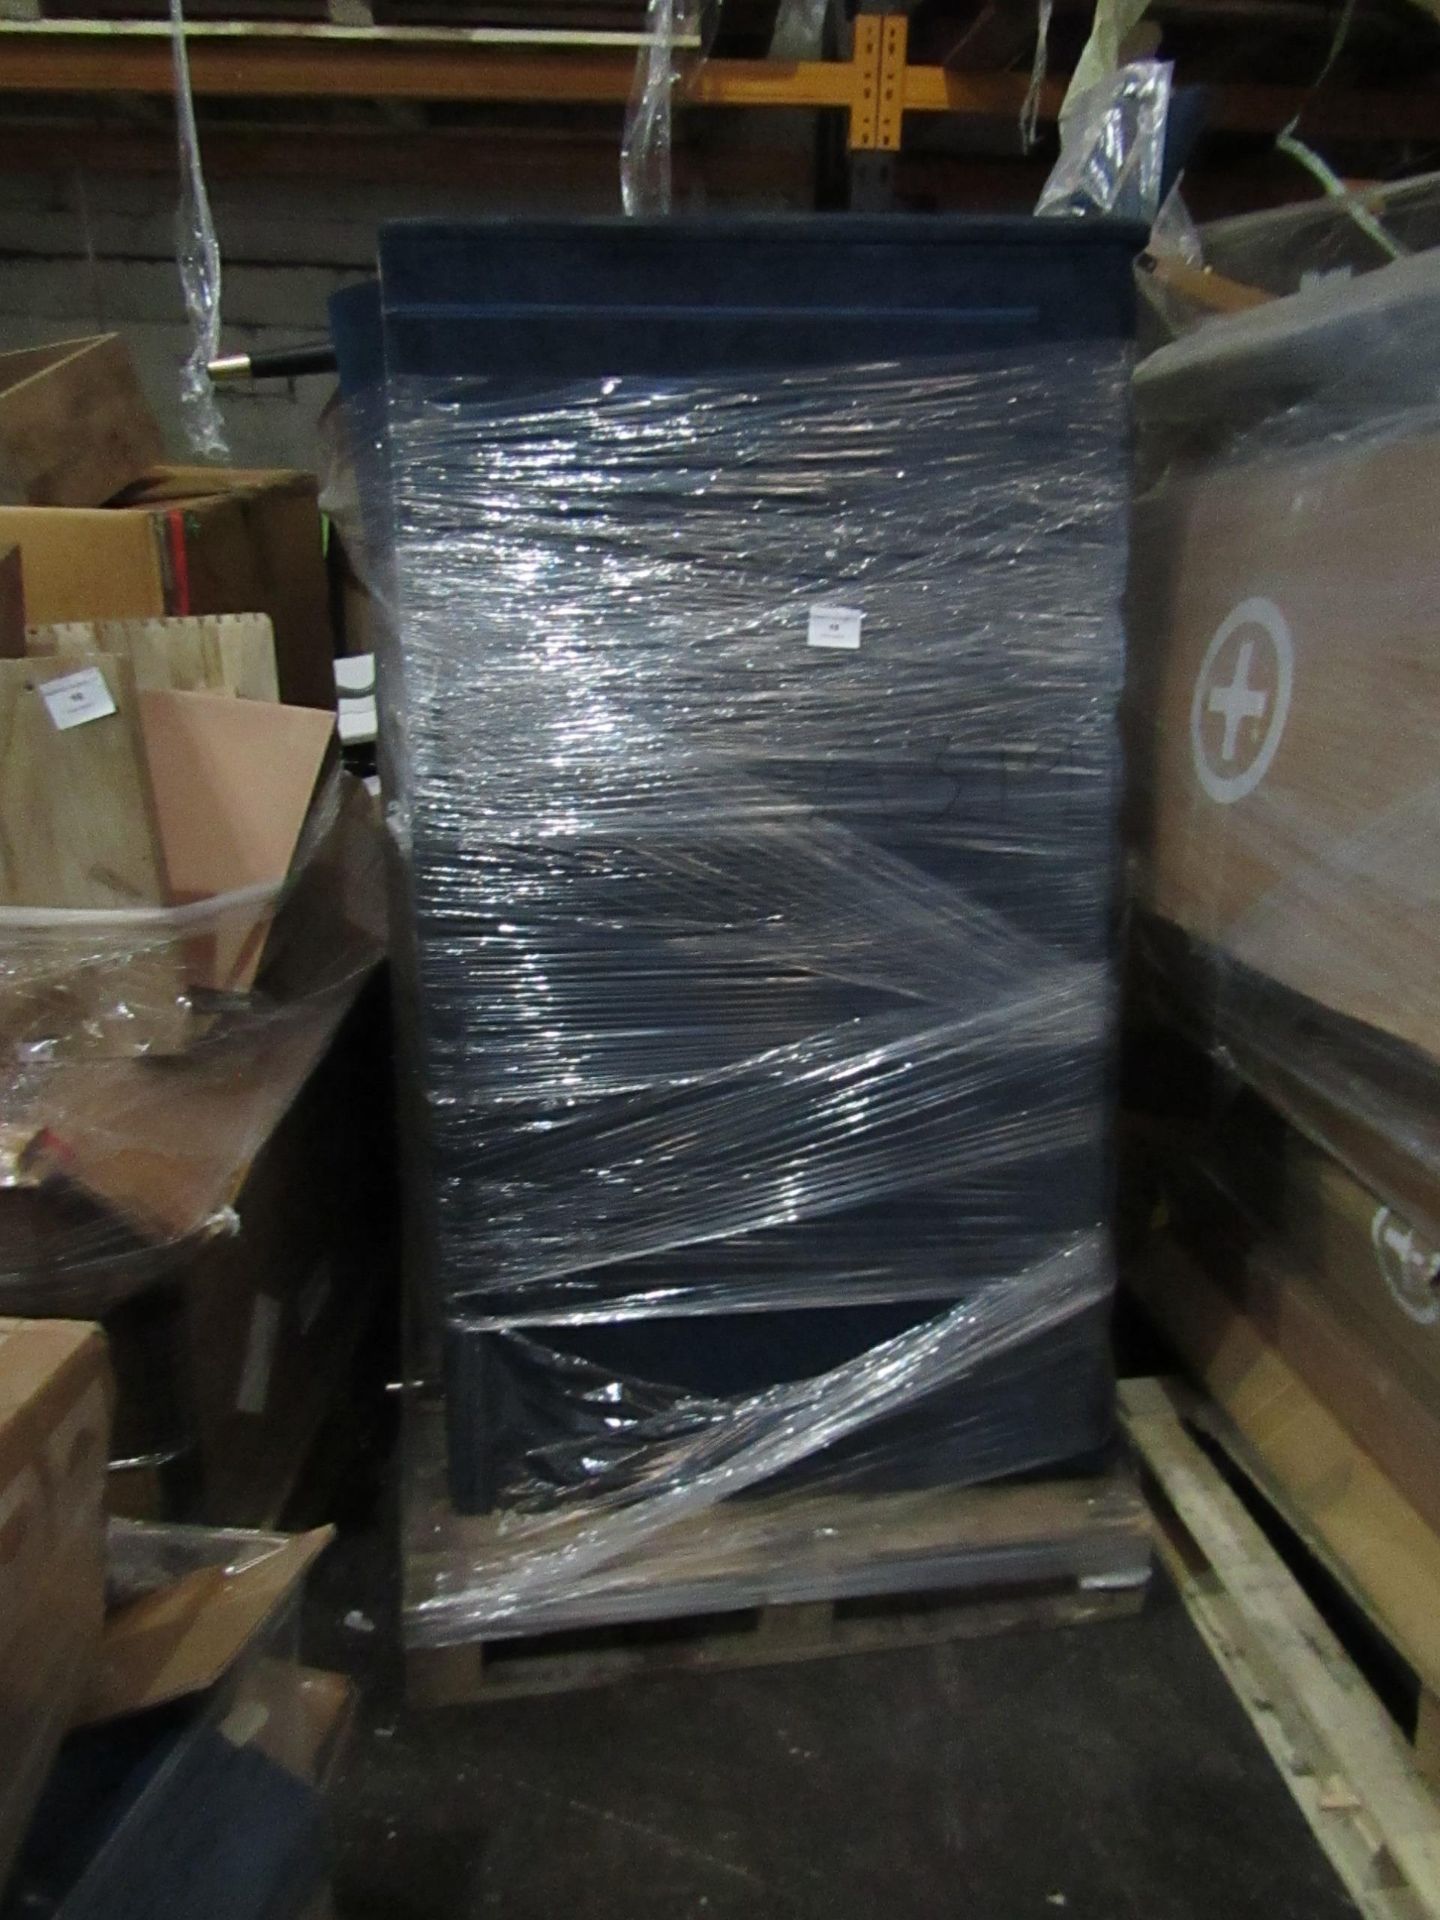 | 1X | PALLET OF SWOON B.E.R FURNITURE, UNMANIFESTED, WE HAVE NO IDEA WHAT IS ON THIS PALLET OR